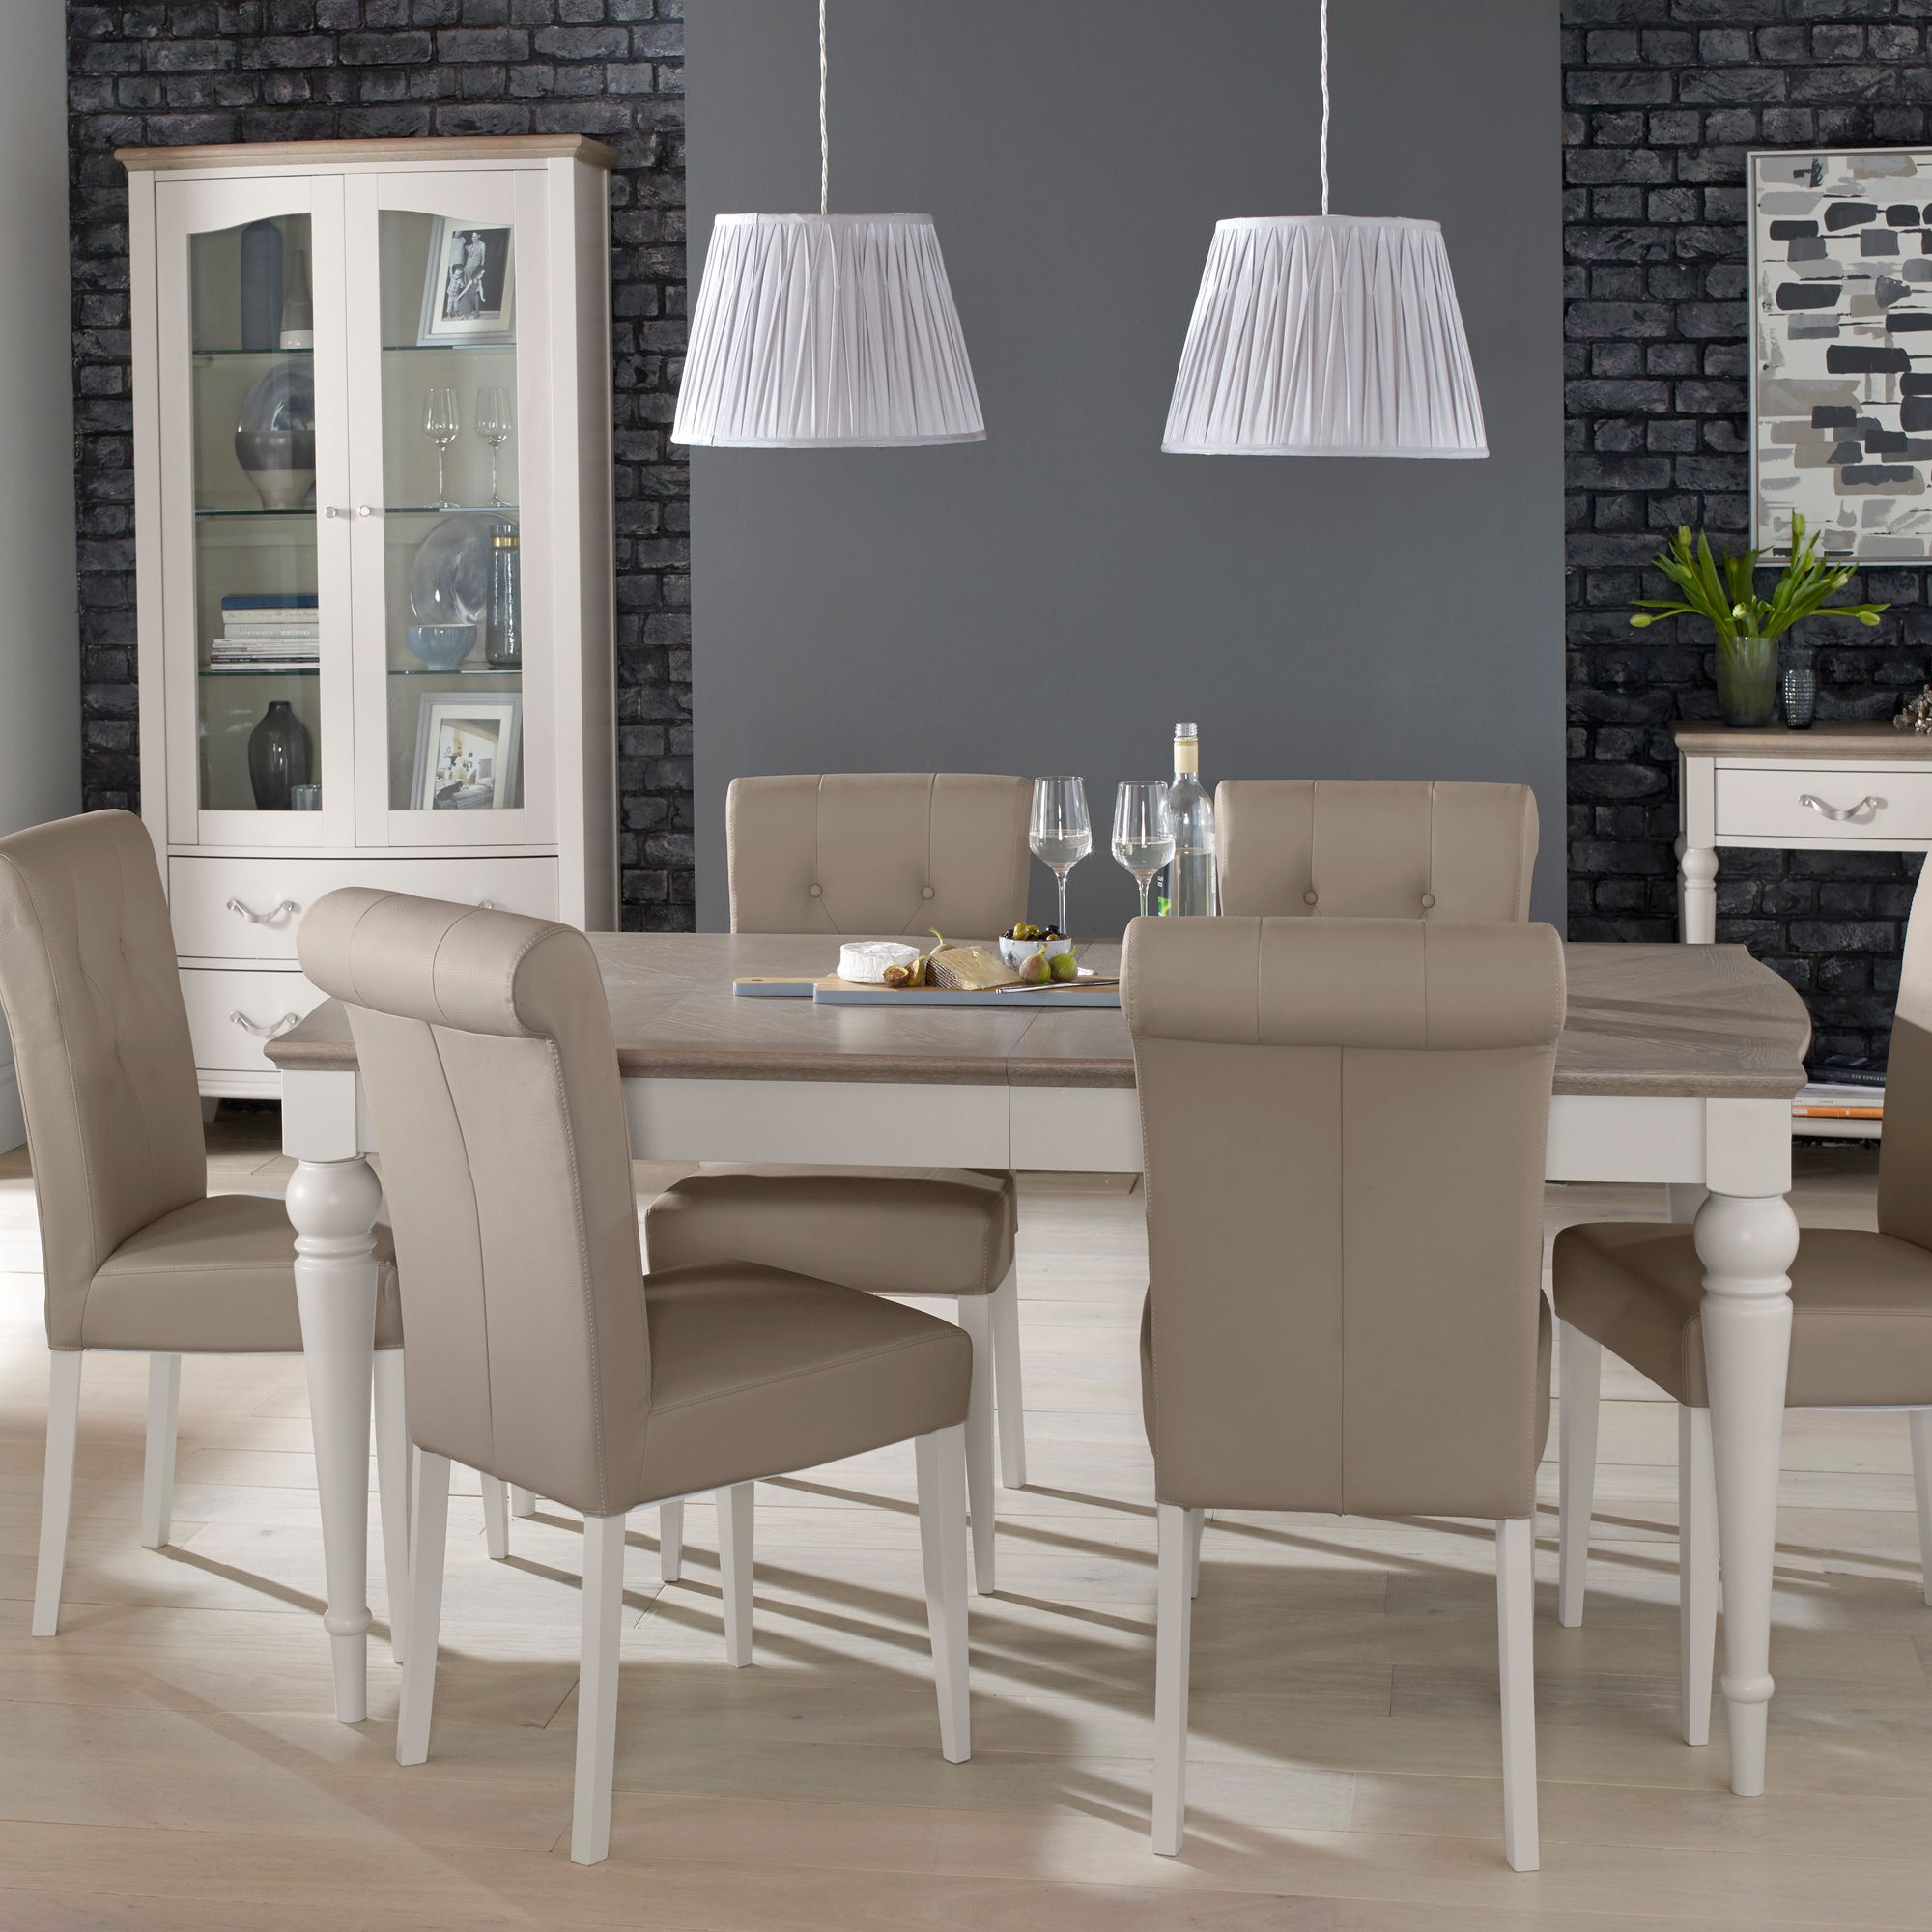 Grey Washed Oak Extending Dining Table, Grey Leather Dining Room Chairs With Oak Legs